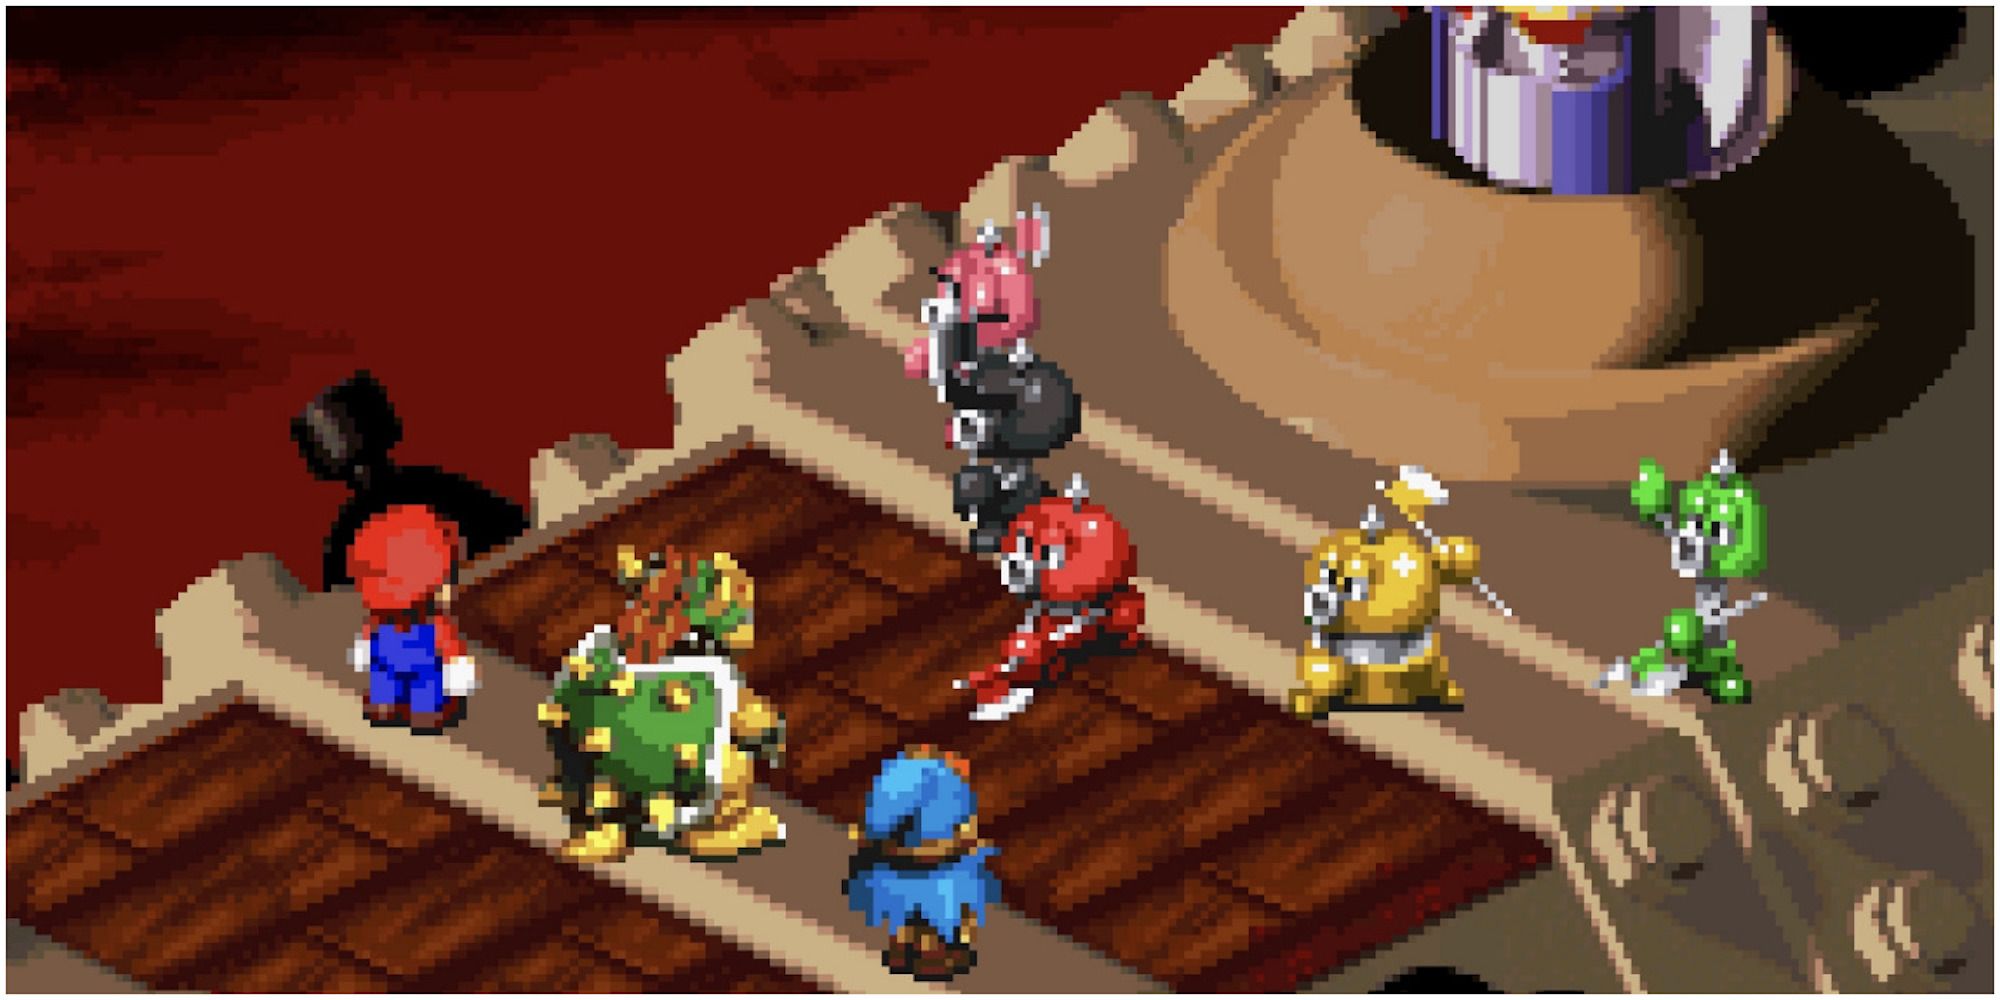 A scene featuring characters from Super Mario RPG